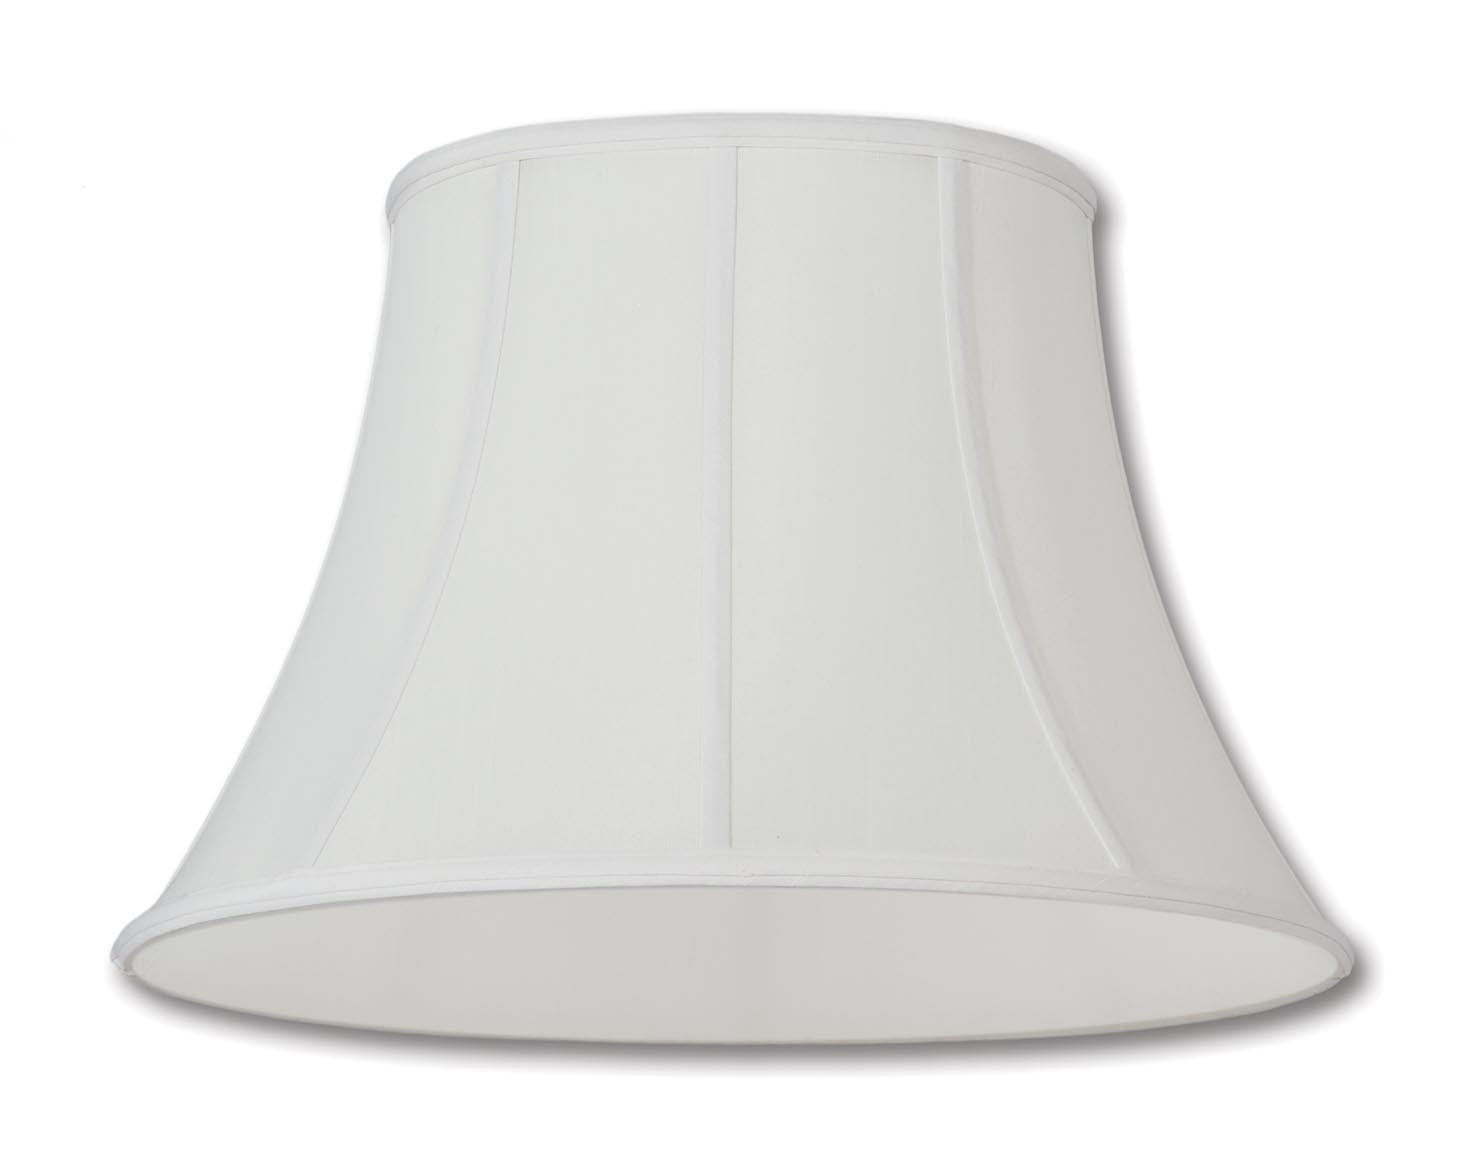 Off White Color Oval Bell Lamp Shades - Tissue Shantung Material